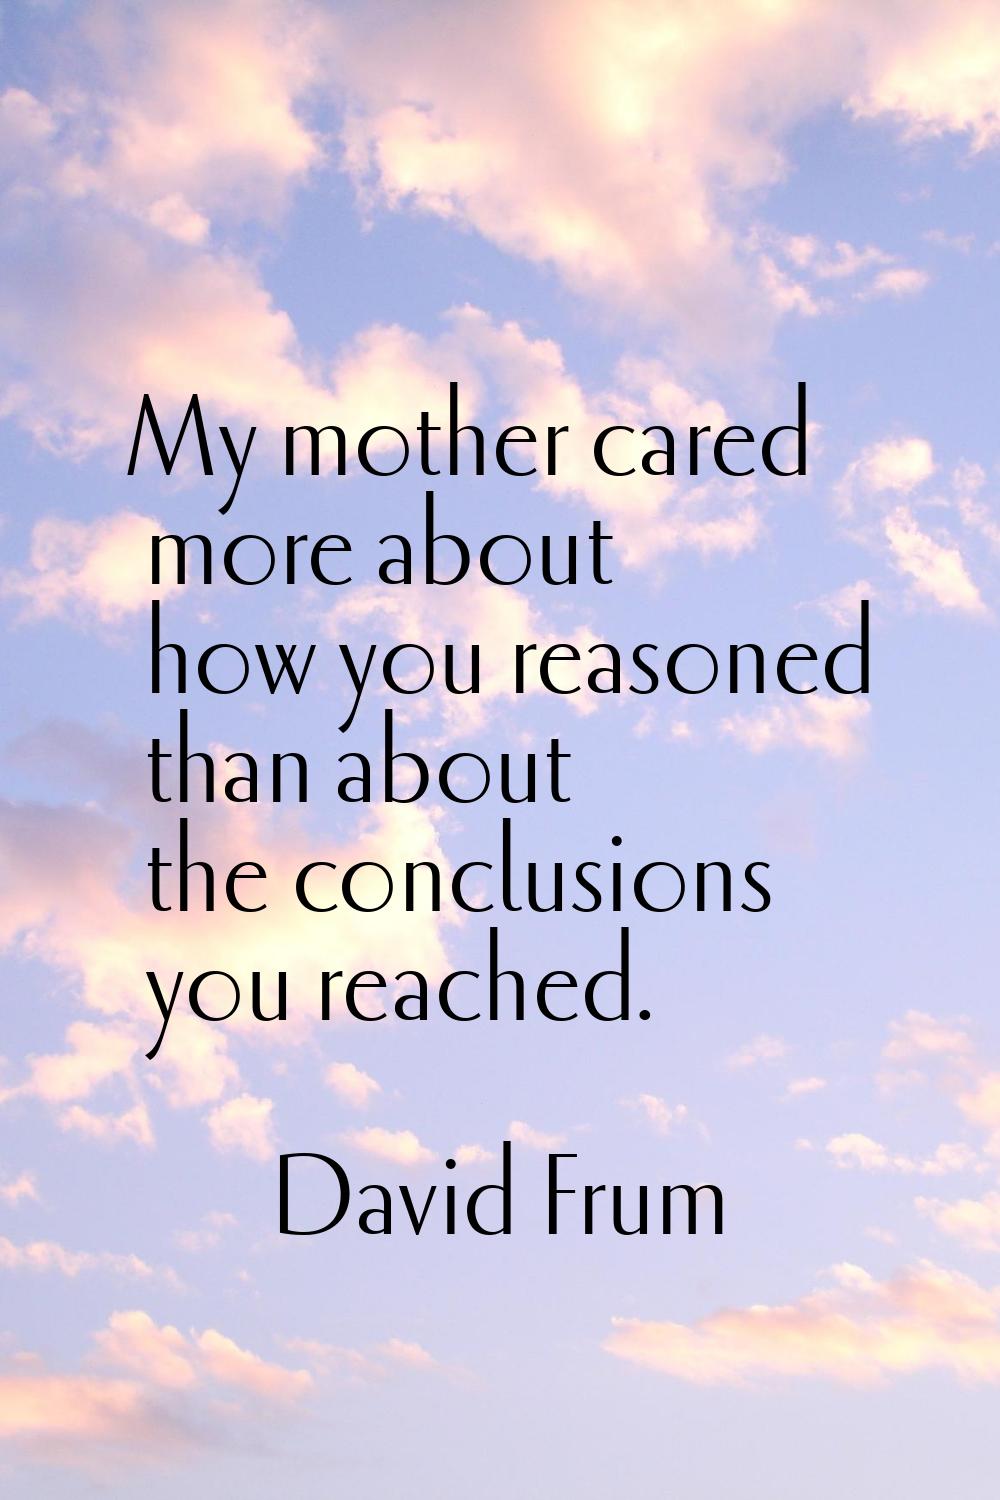 My mother cared more about how you reasoned than about the conclusions you reached.